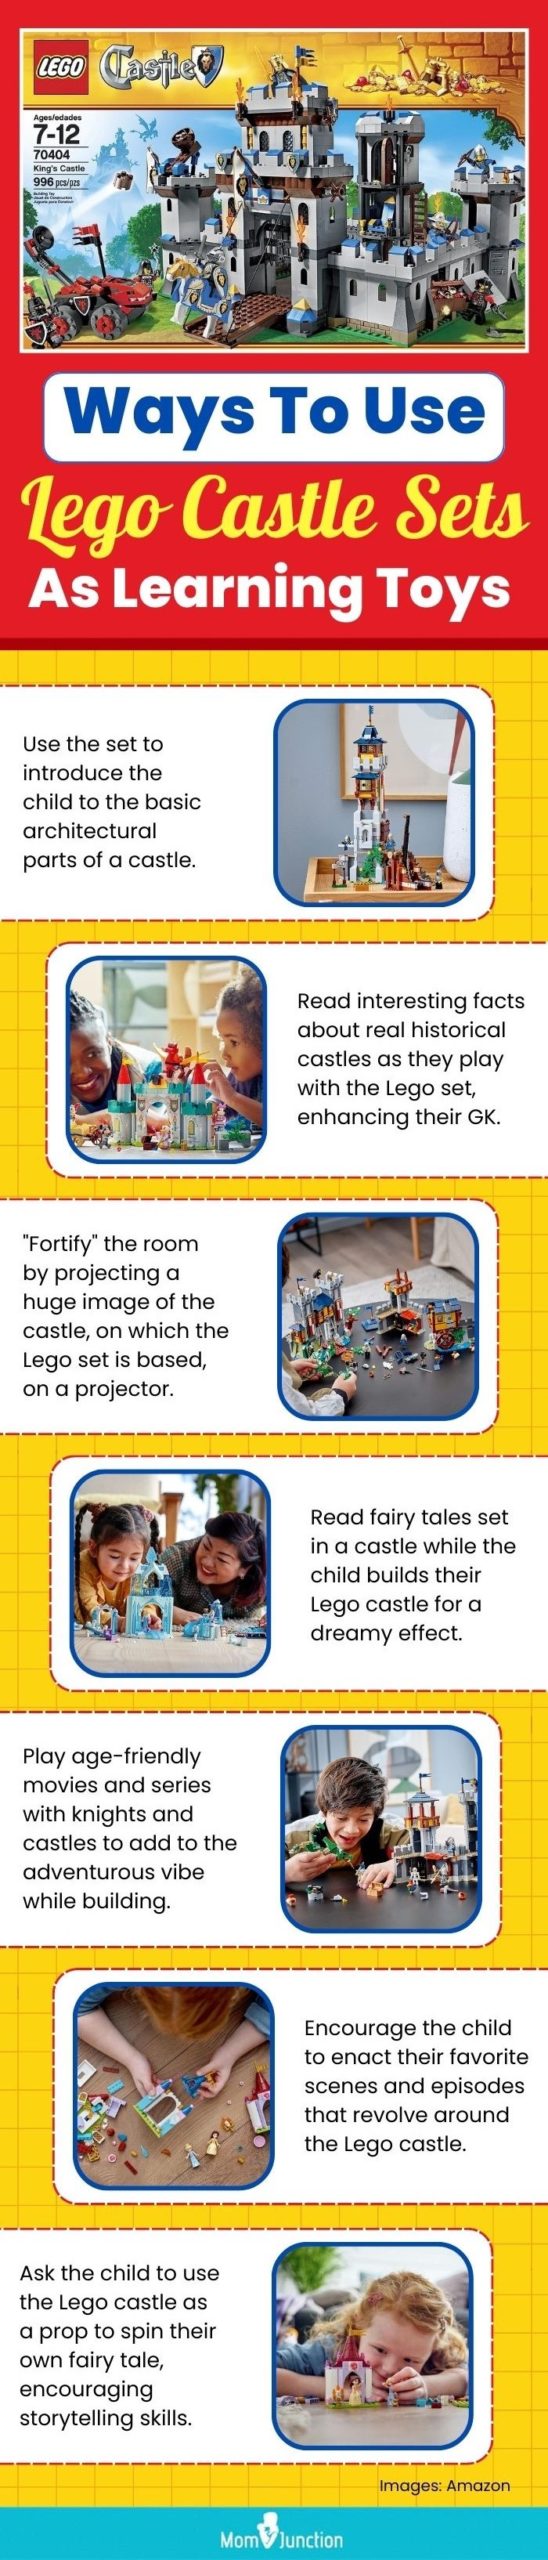 Ways To Use Lego Castle Sets As Learning And Engrossing Toys (infographic)